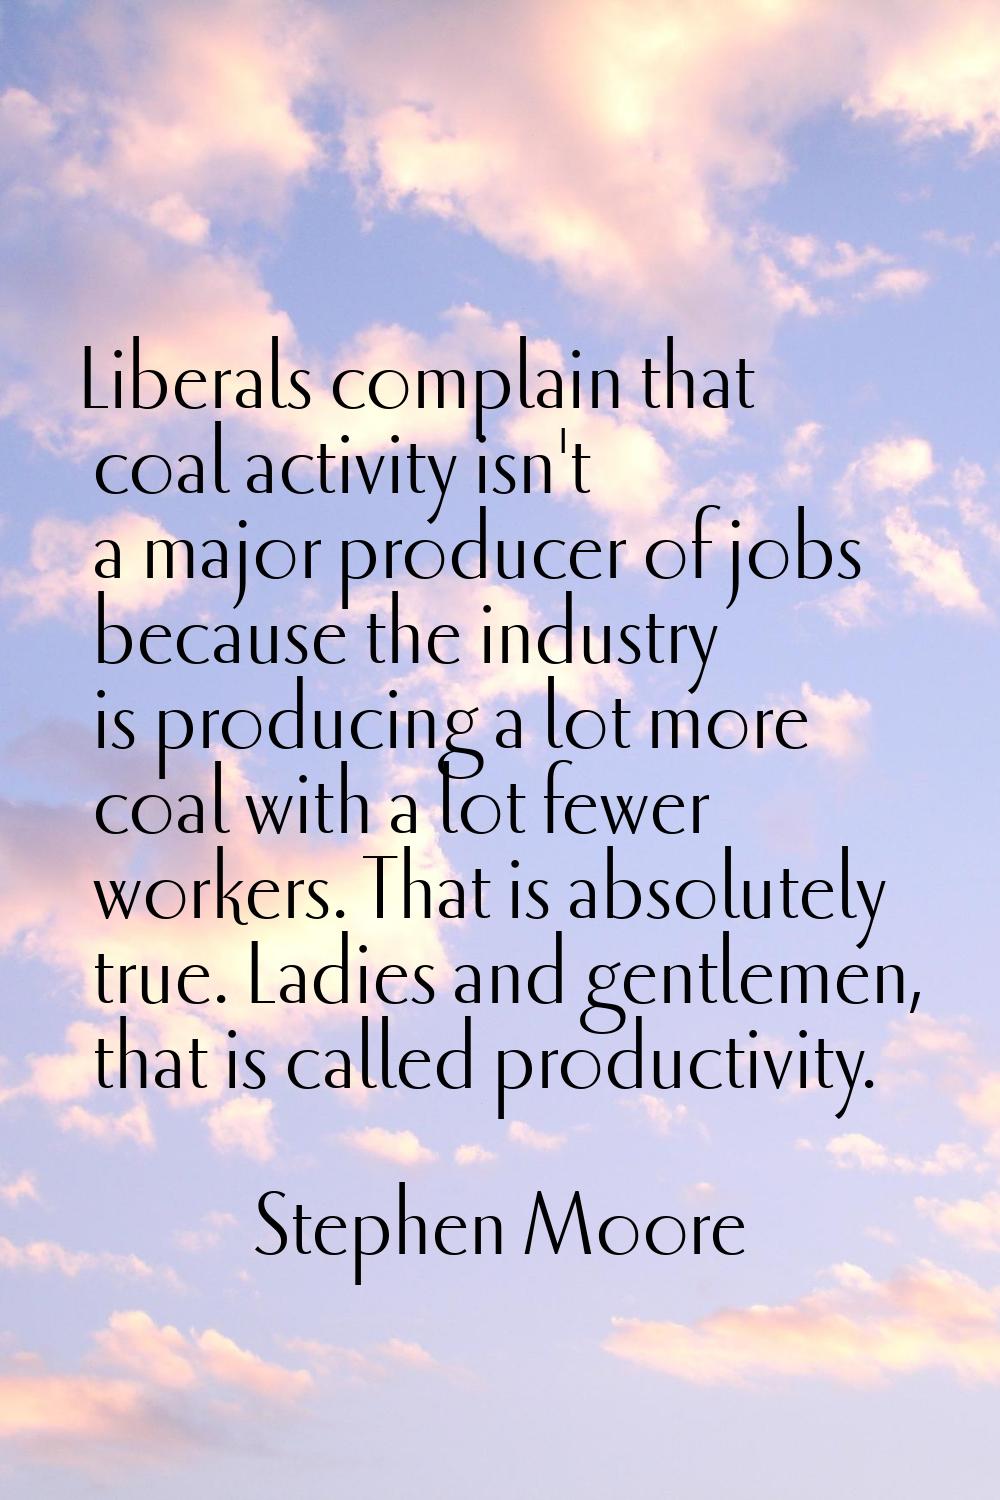 Liberals complain that coal activity isn't a major producer of jobs because the industry is produci